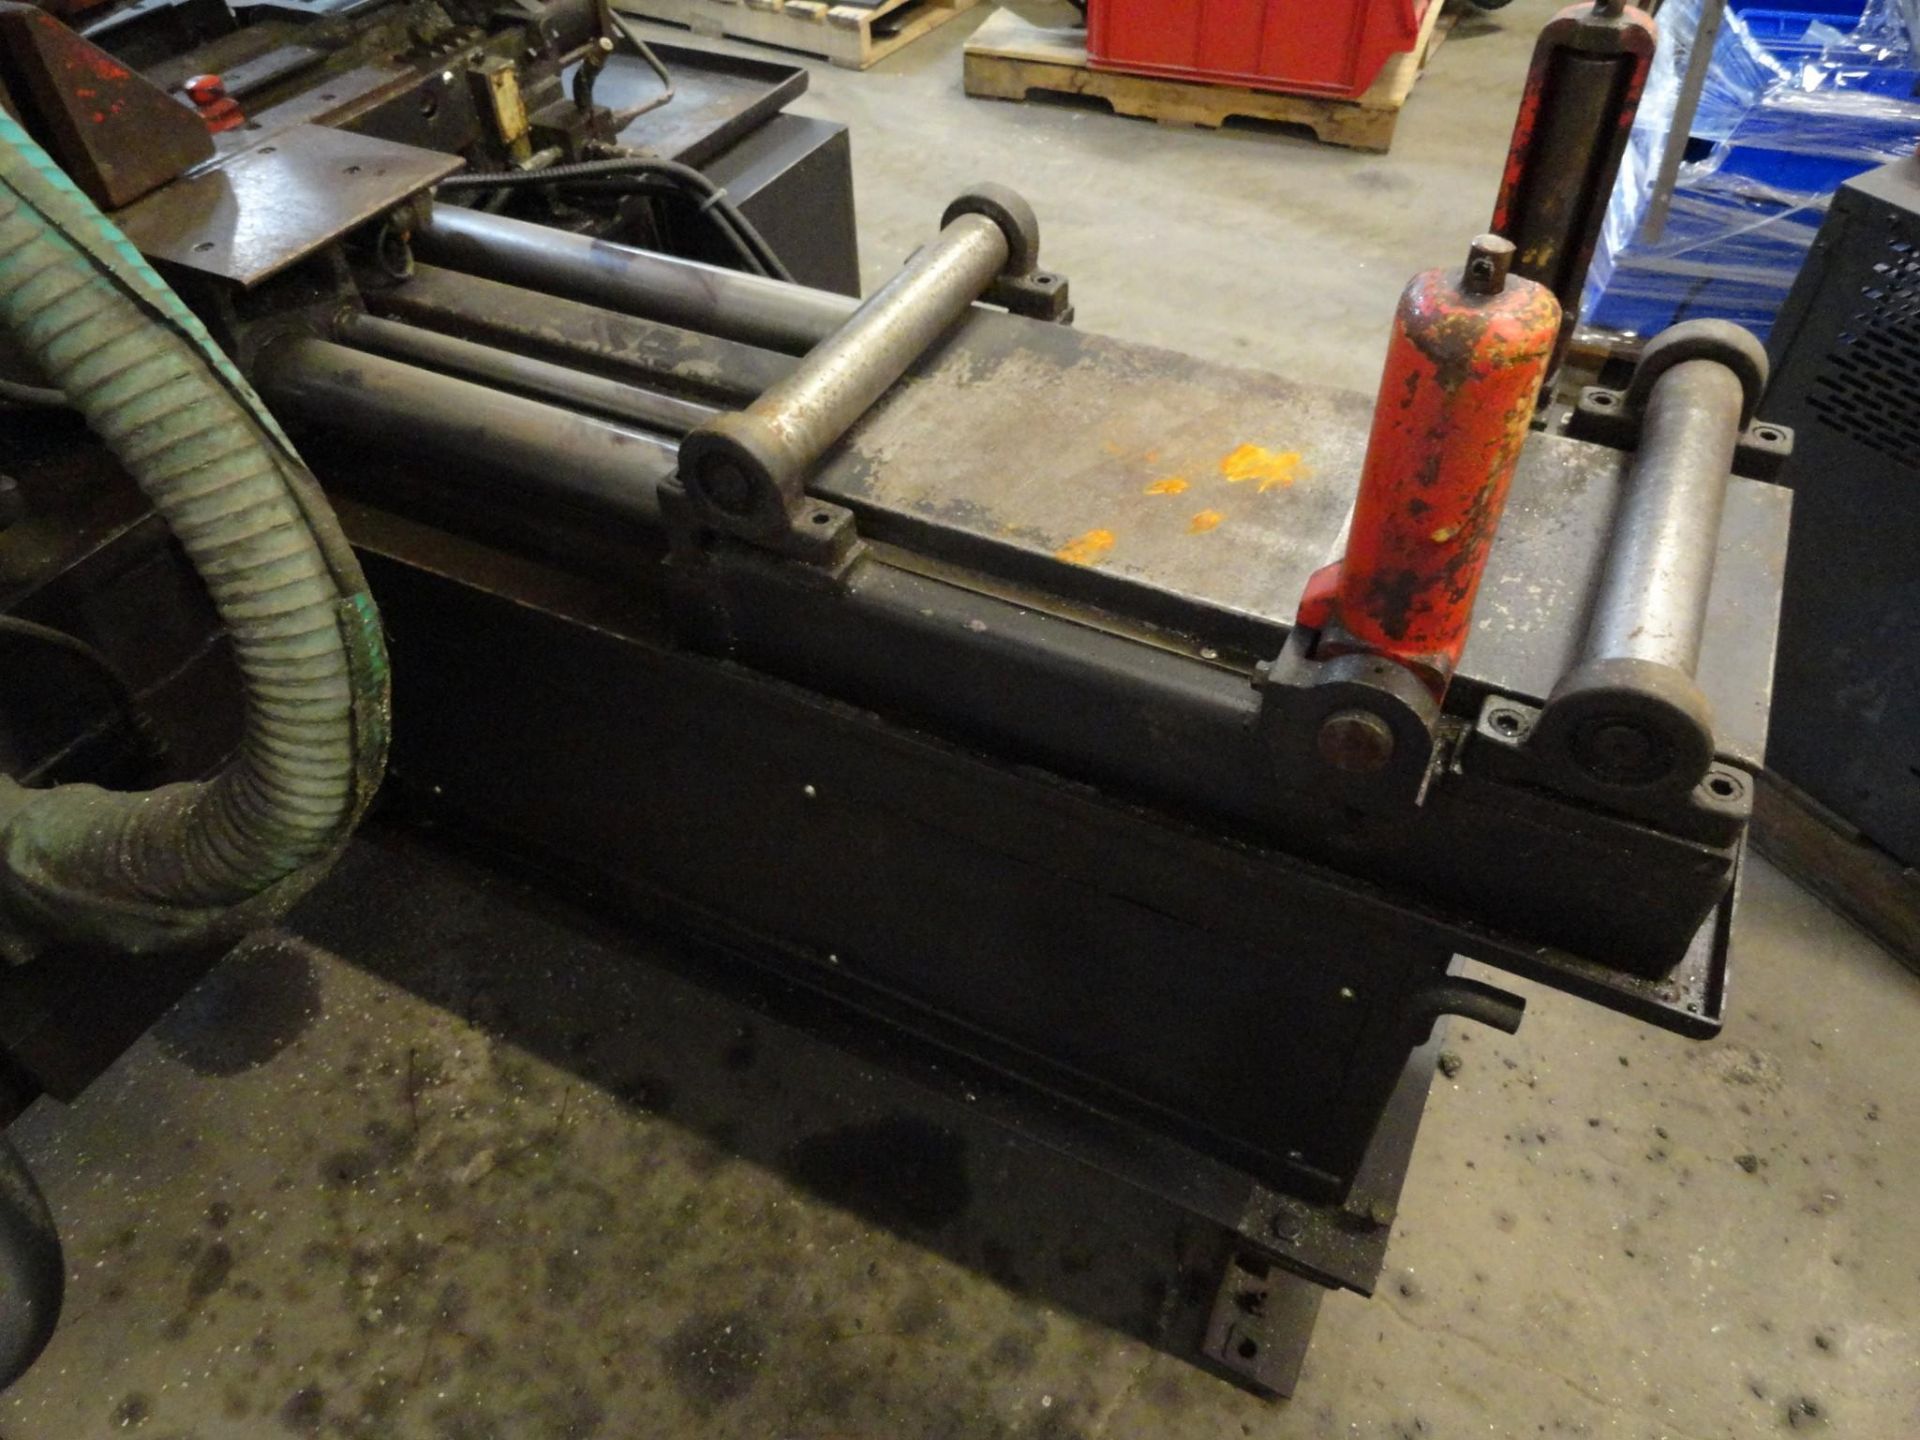 Amada HAD-250W Automatic Band Saw, Serial Number 250-20166 - Image 16 of 23